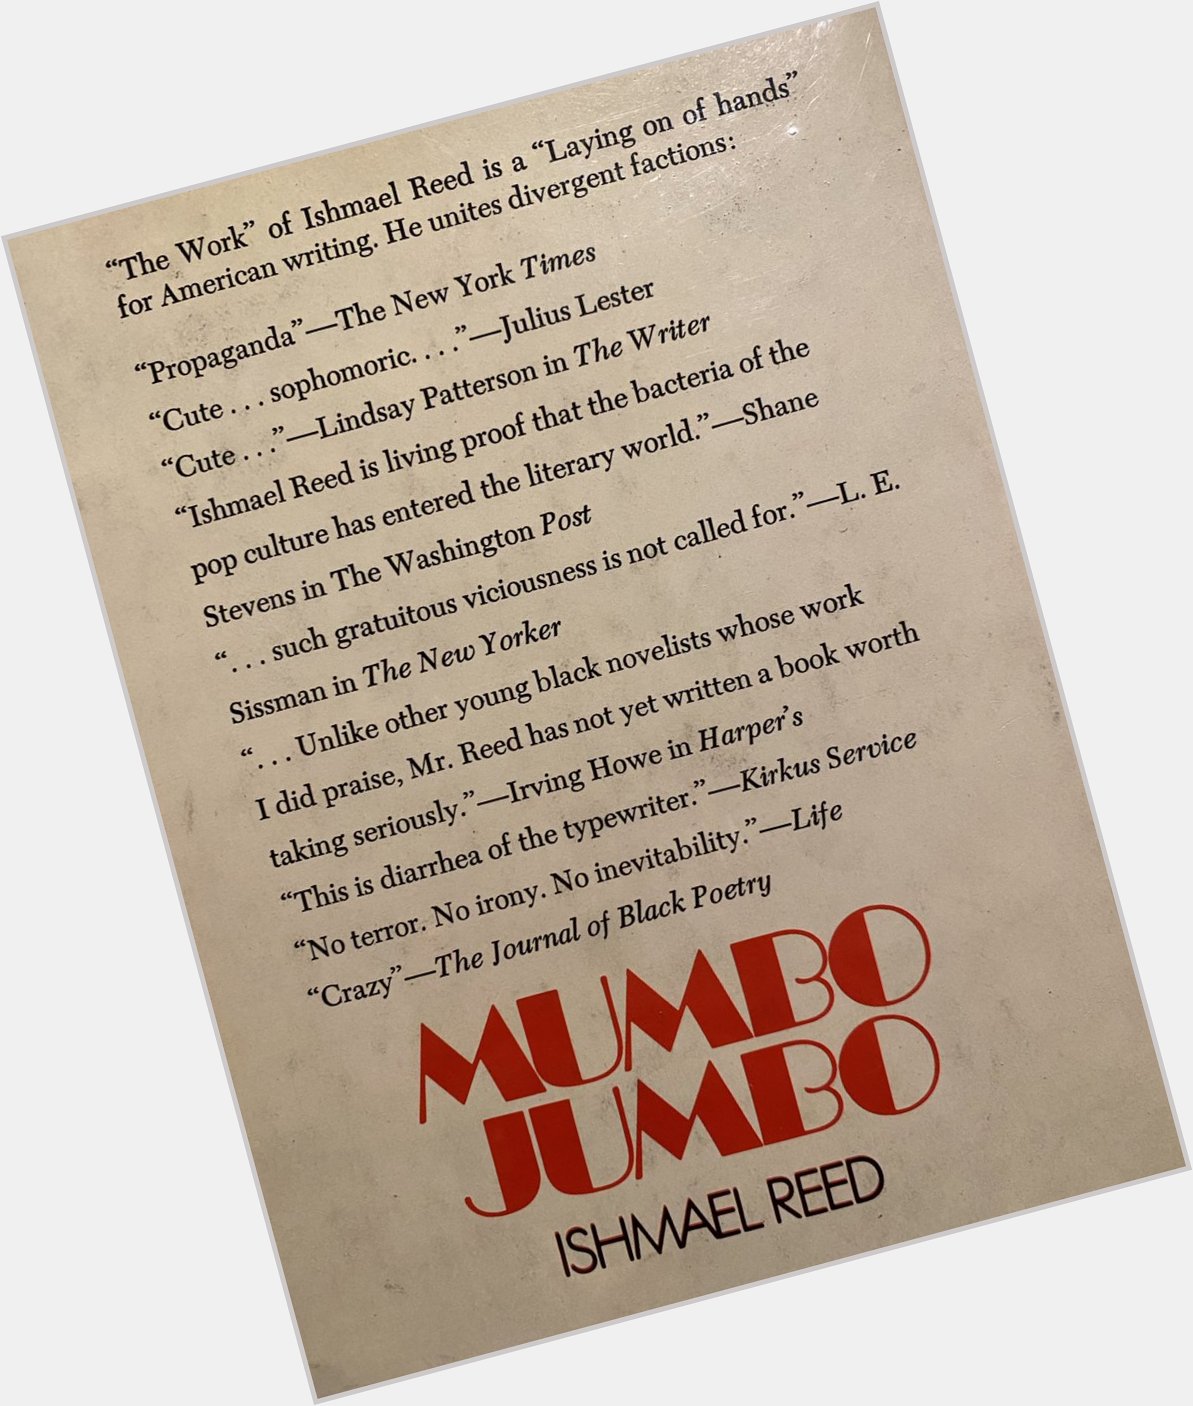 Happy birthday to Ishmael Reed who once published a book with only negative blurbs 